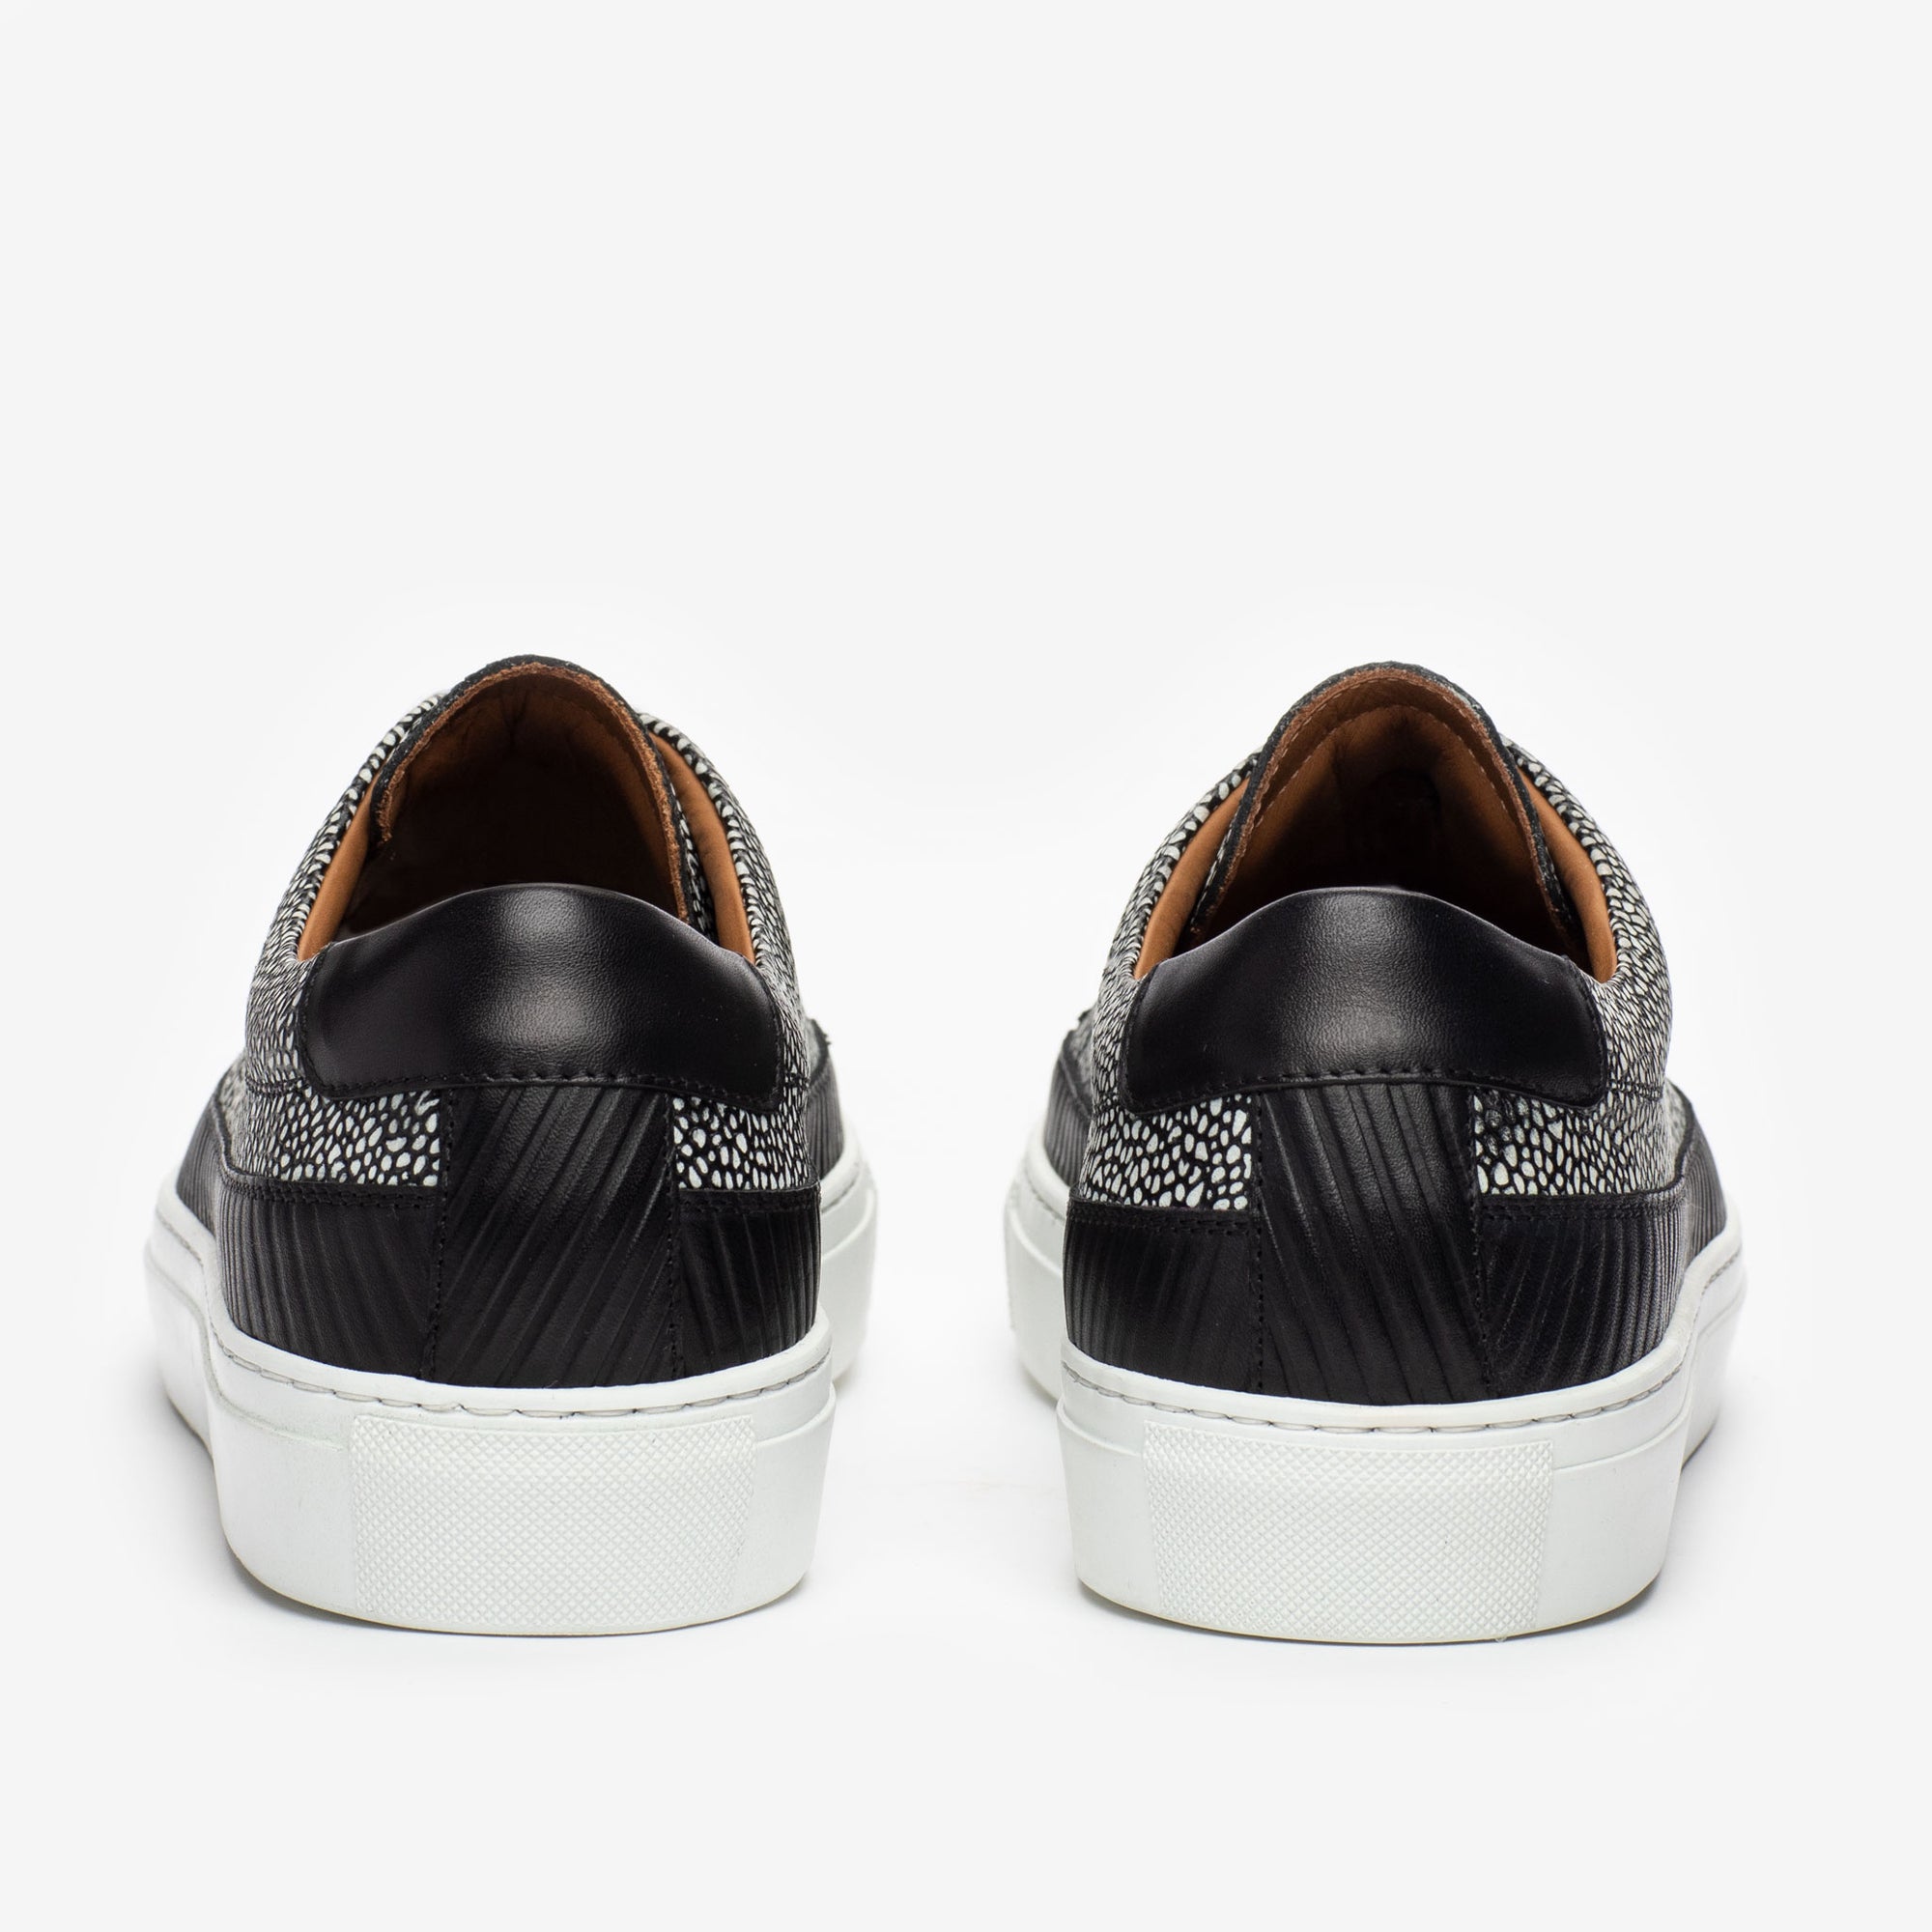 The Fifth Ave Sneaker in Stone Heel